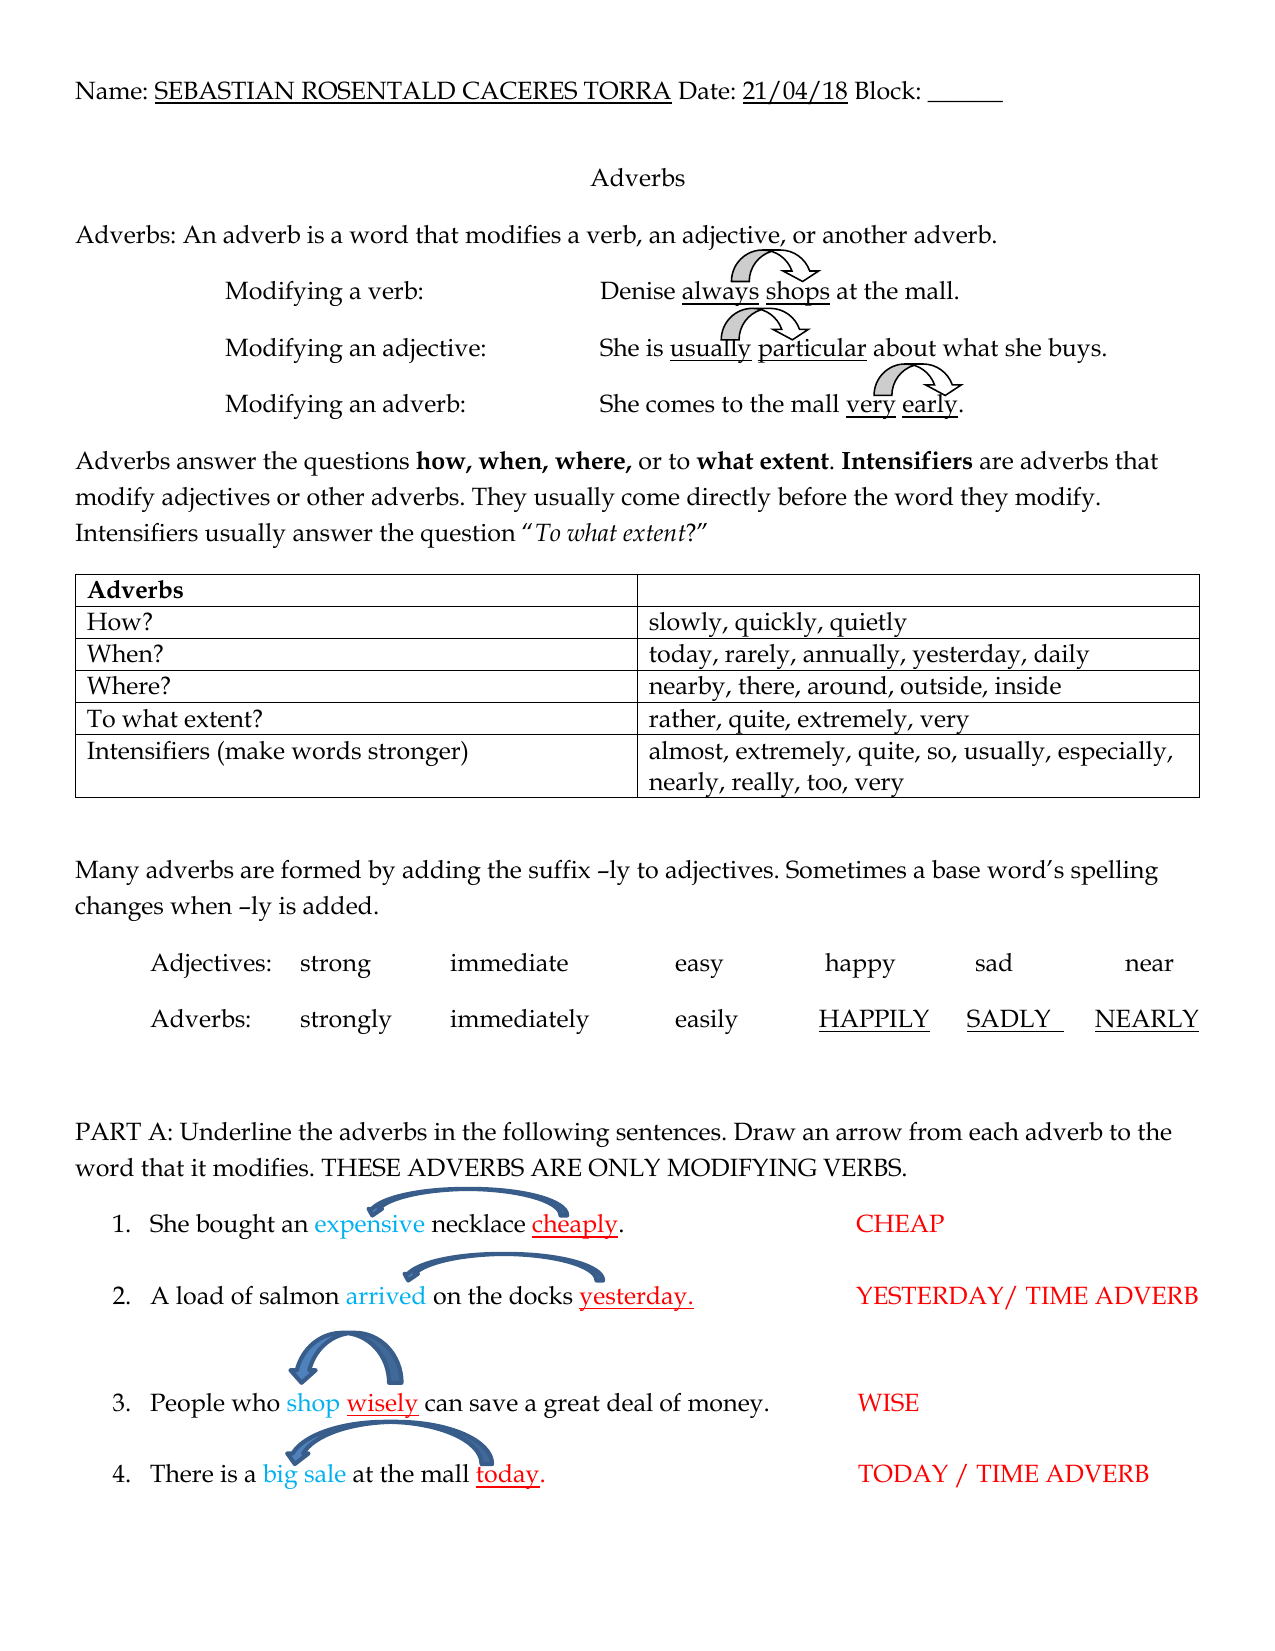 adverbs-modifying-adjectives-worksheet-free-printable-adjectives-worksheets